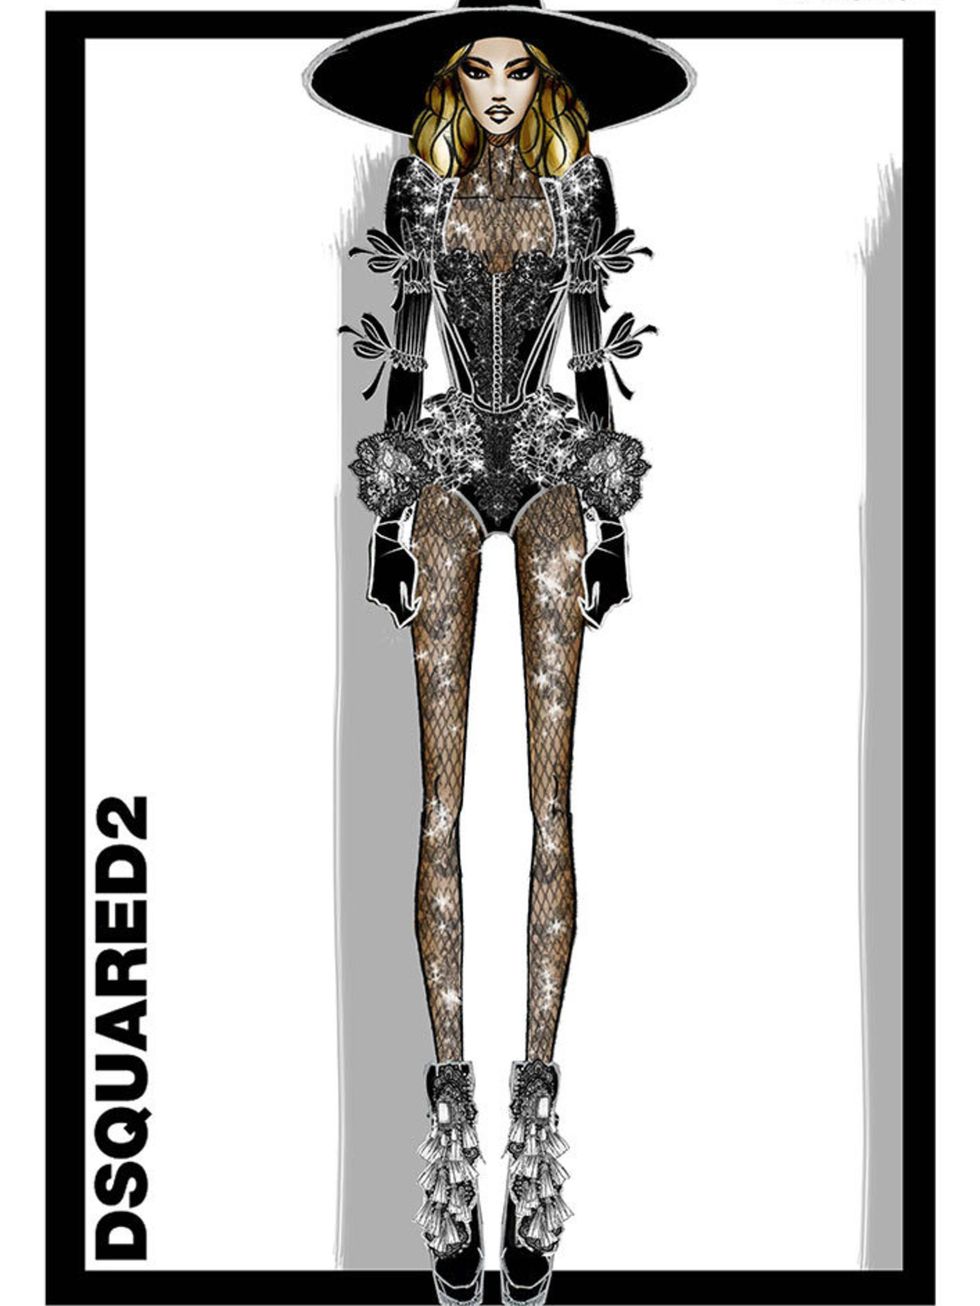 Beyoncé's opening look was designed by DSquared2.